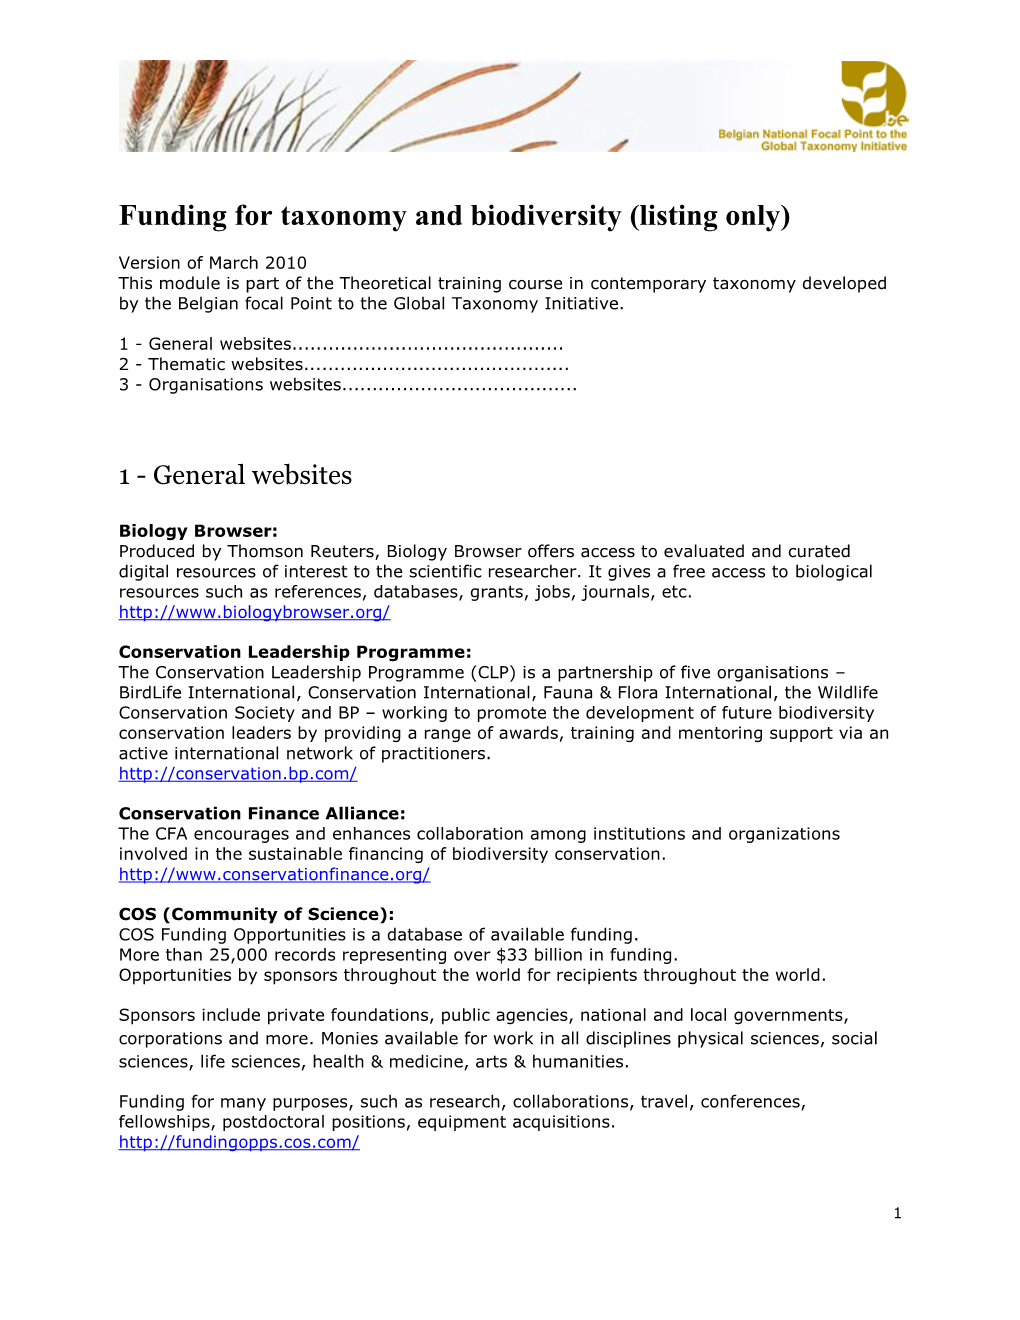 Funding for Taxonomy and Biodiversity (Listing Only)